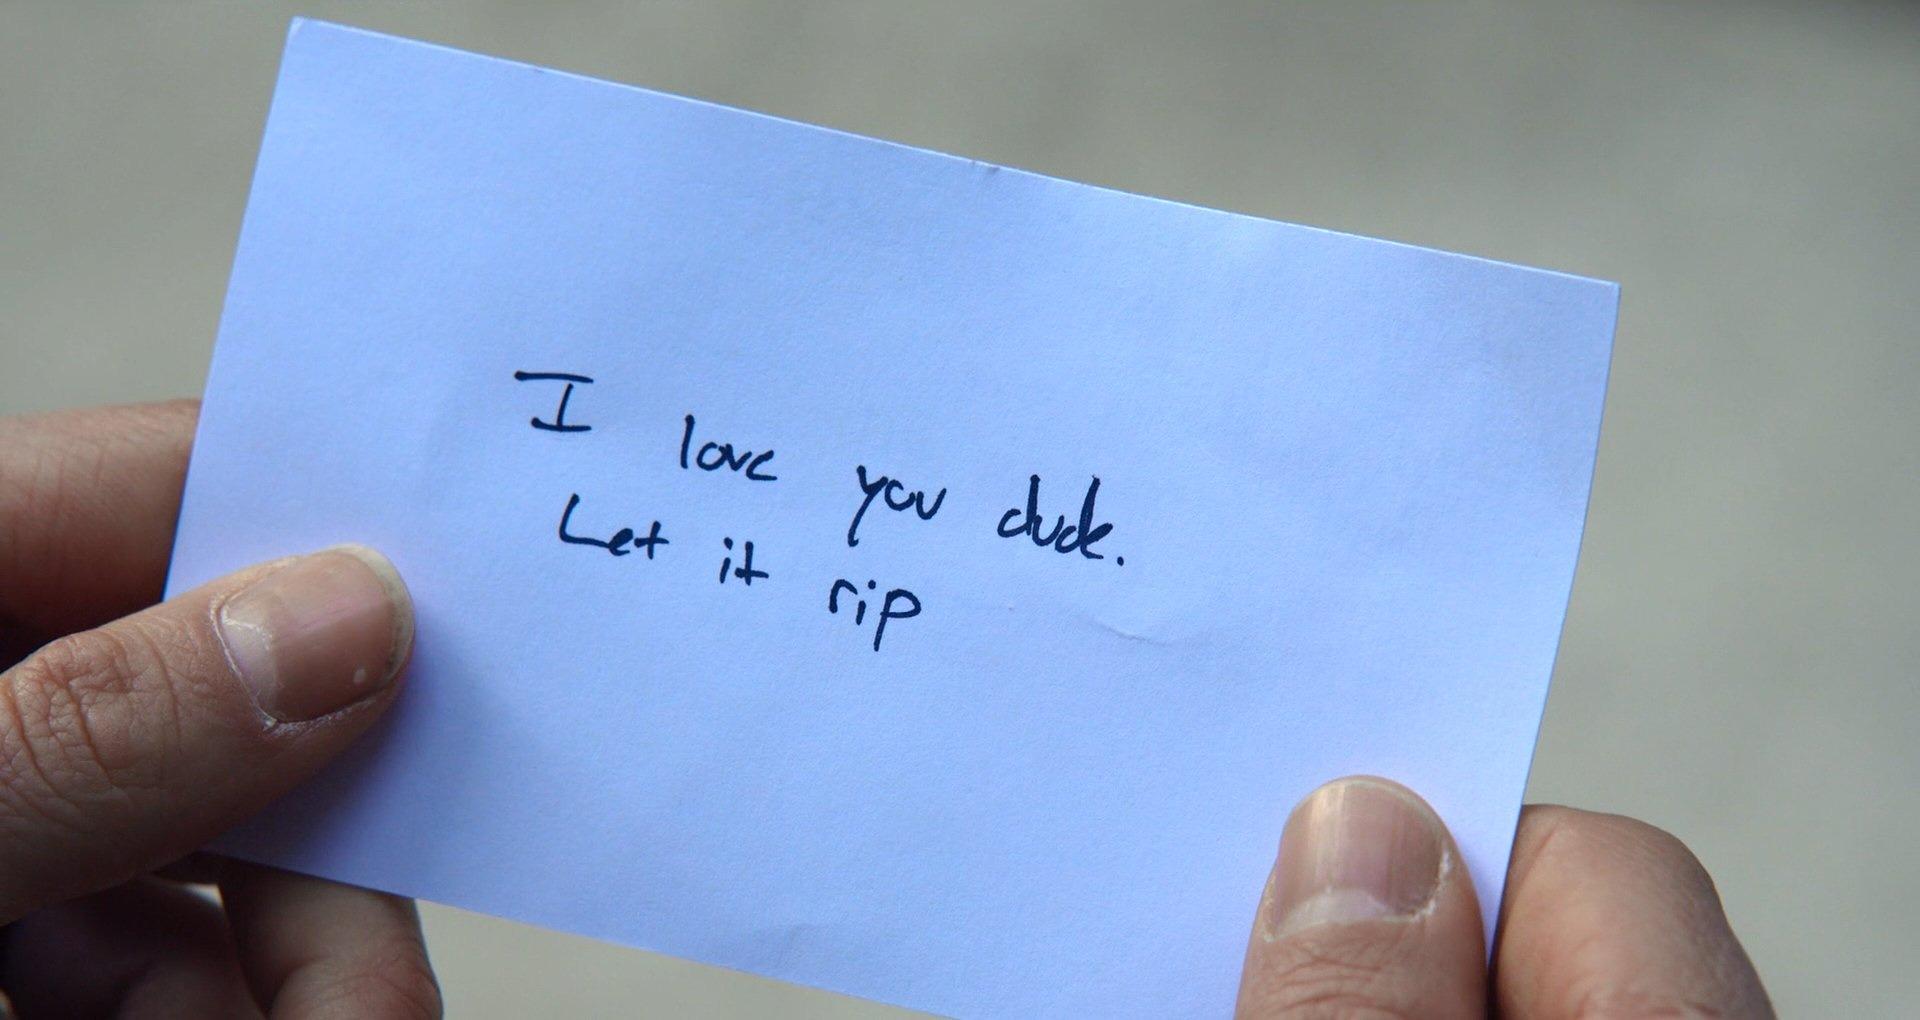 A white note with 'I love you dude. Let it rip